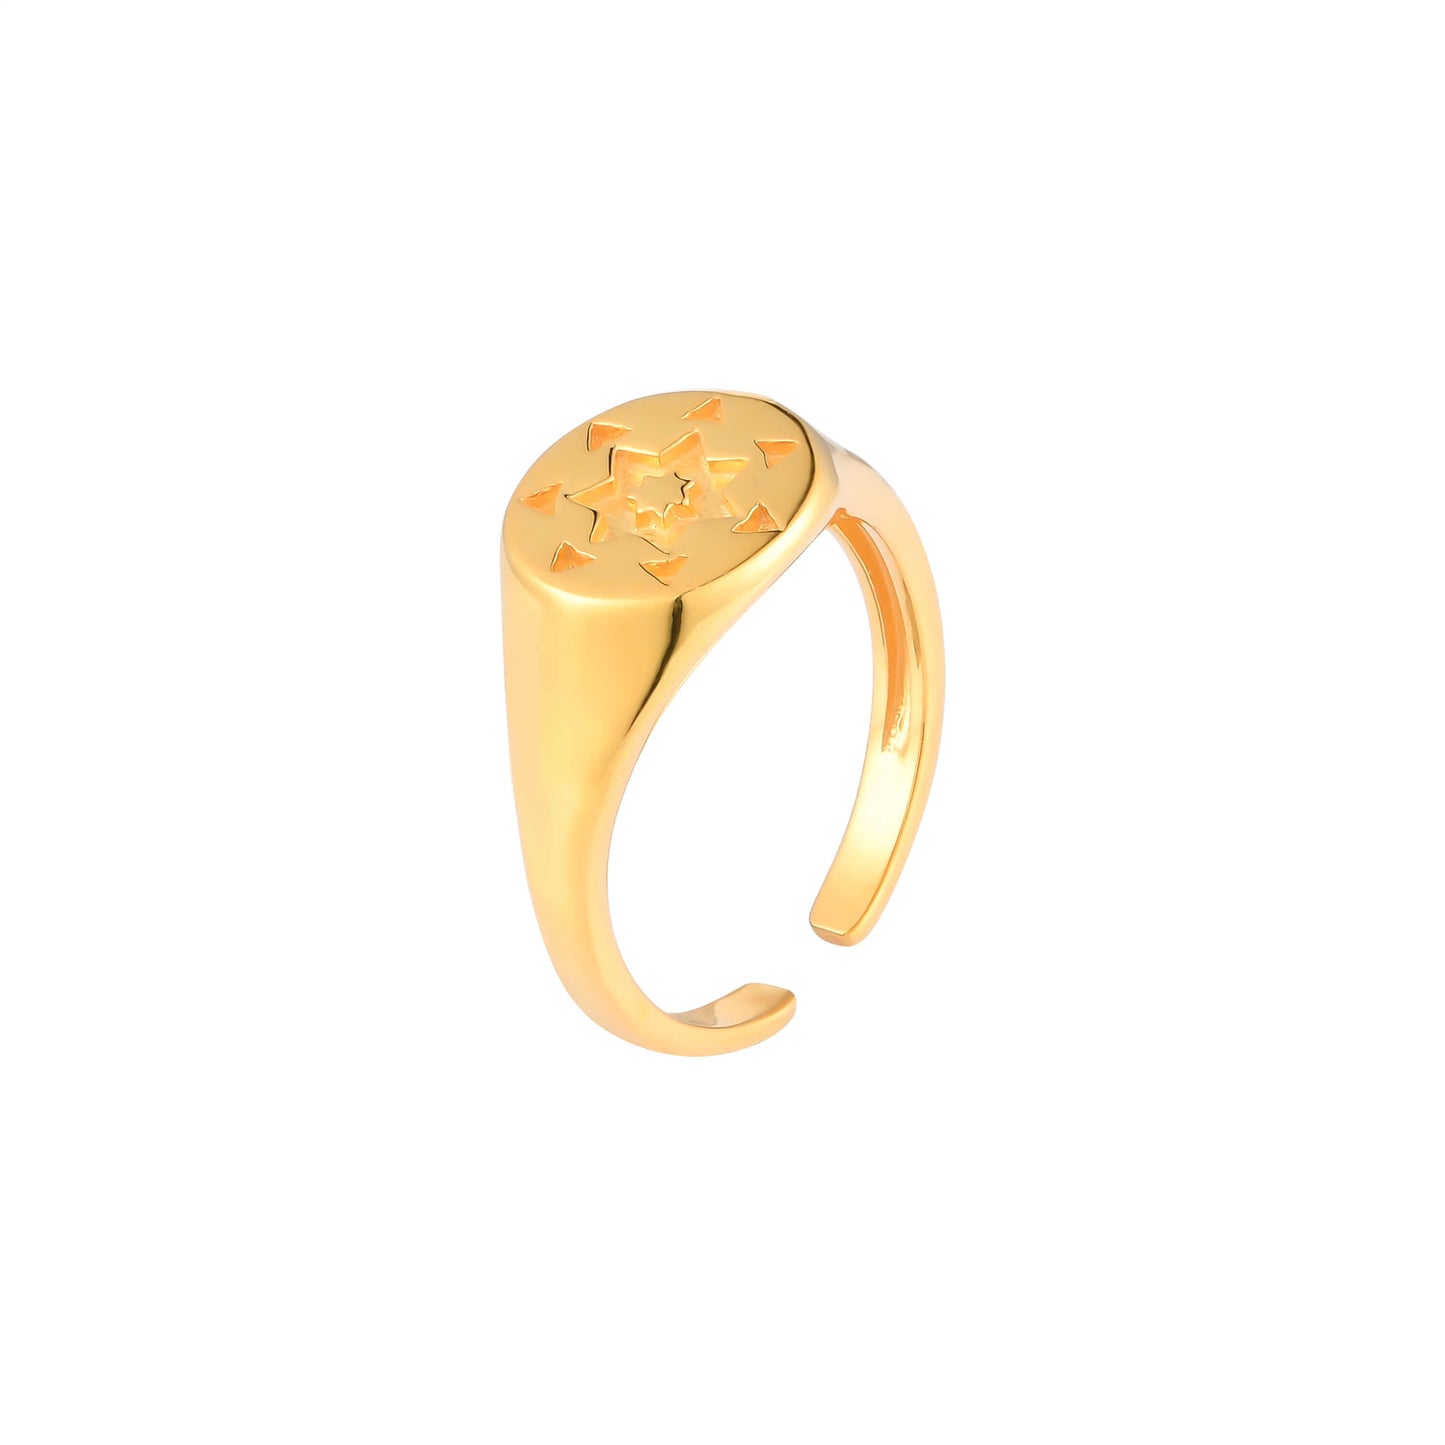 Silver Rings 18k Gold-plated Nour Star Ring